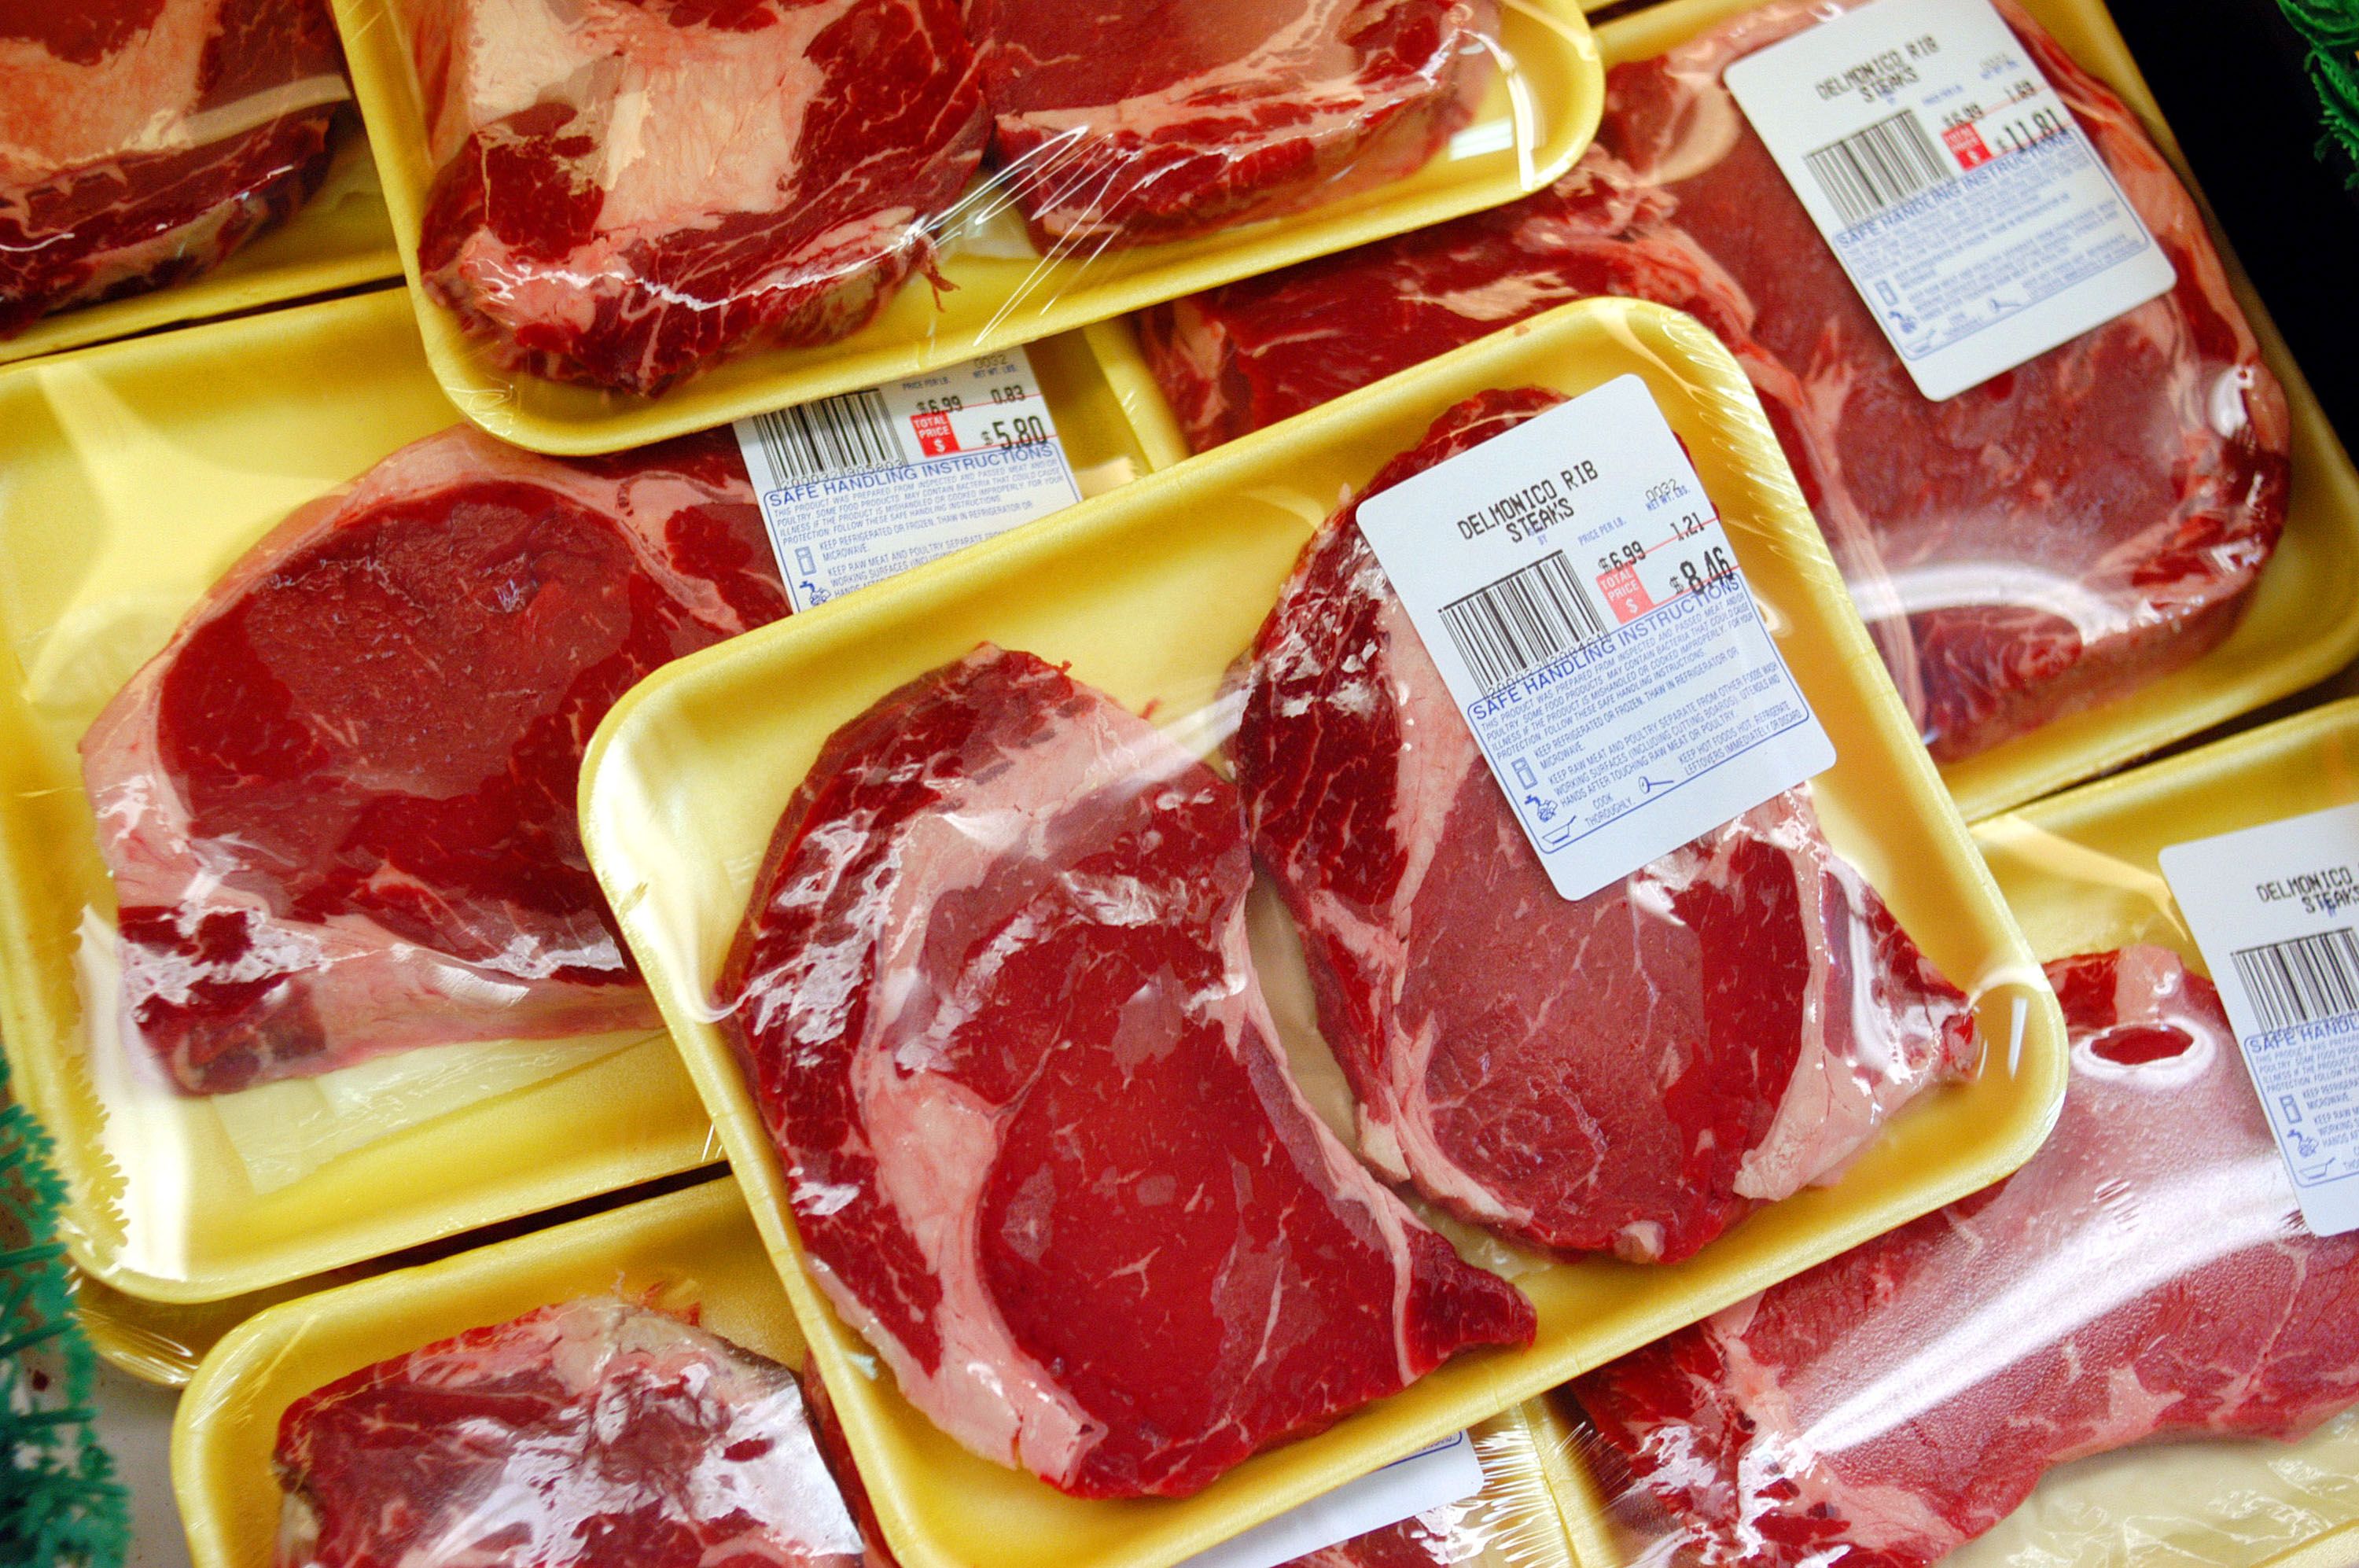 Here's What That "Blood" In Your Meat Packaging Really